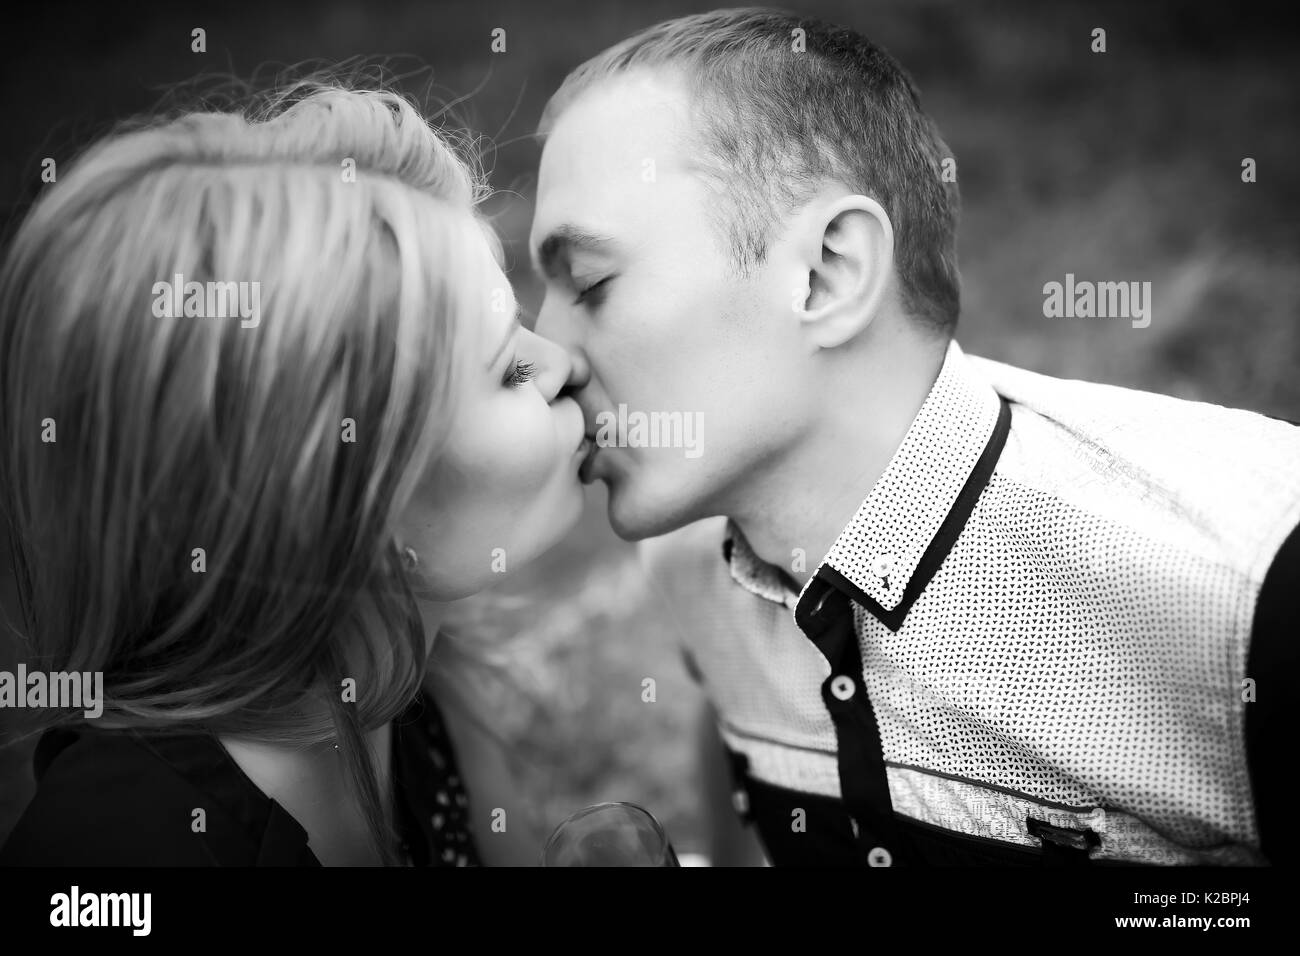 young teenagers on romantic date. beautiful girlfriend kissing and have a good time with boyfriend. happy family relationship concept Stock Photo